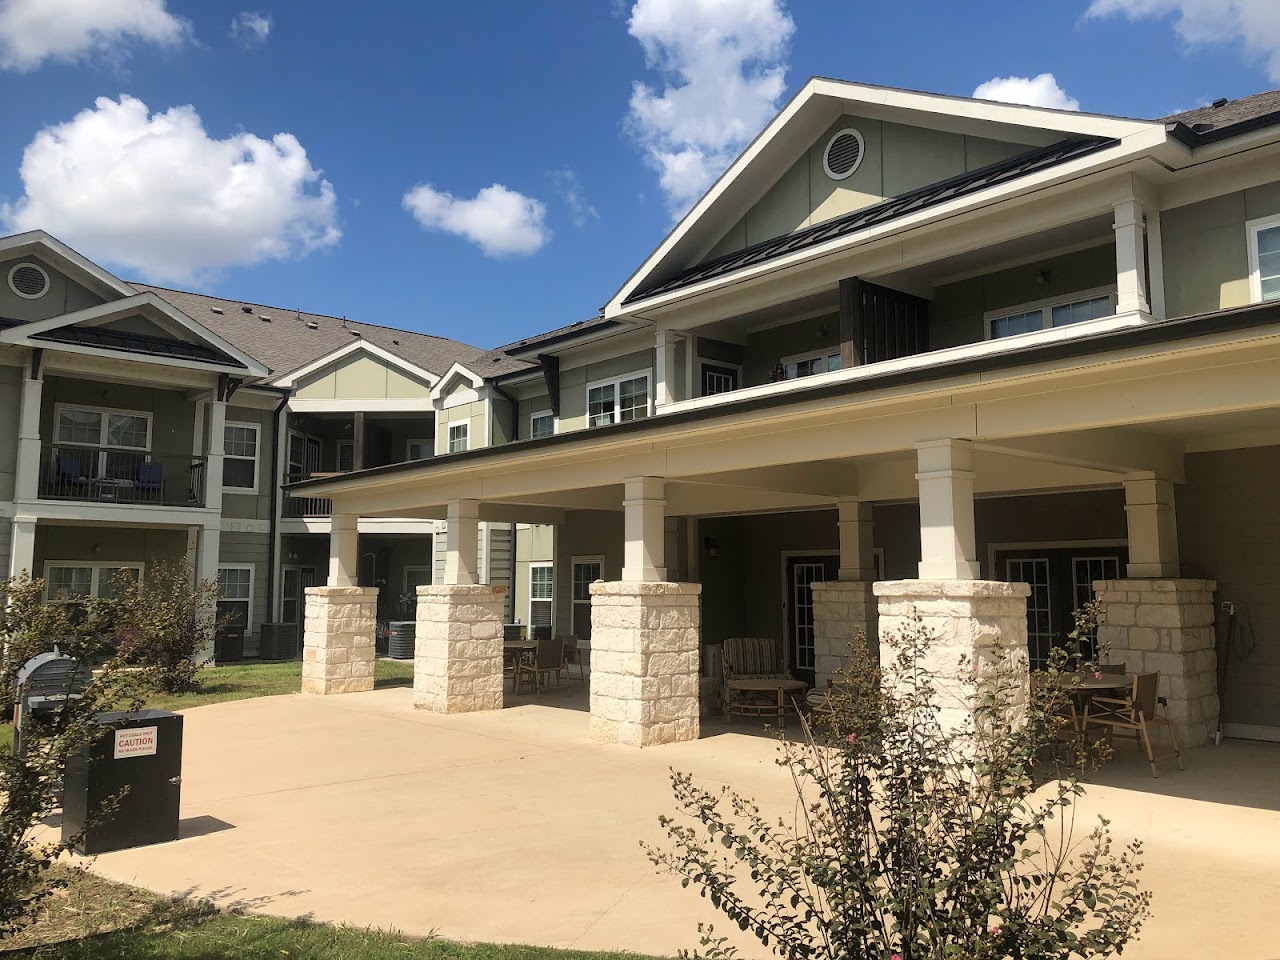 Photo of MANOR AT HANCOCK PARK. Affordable housing located at 108 EE OHNMEISS LAMPASAS, TX 